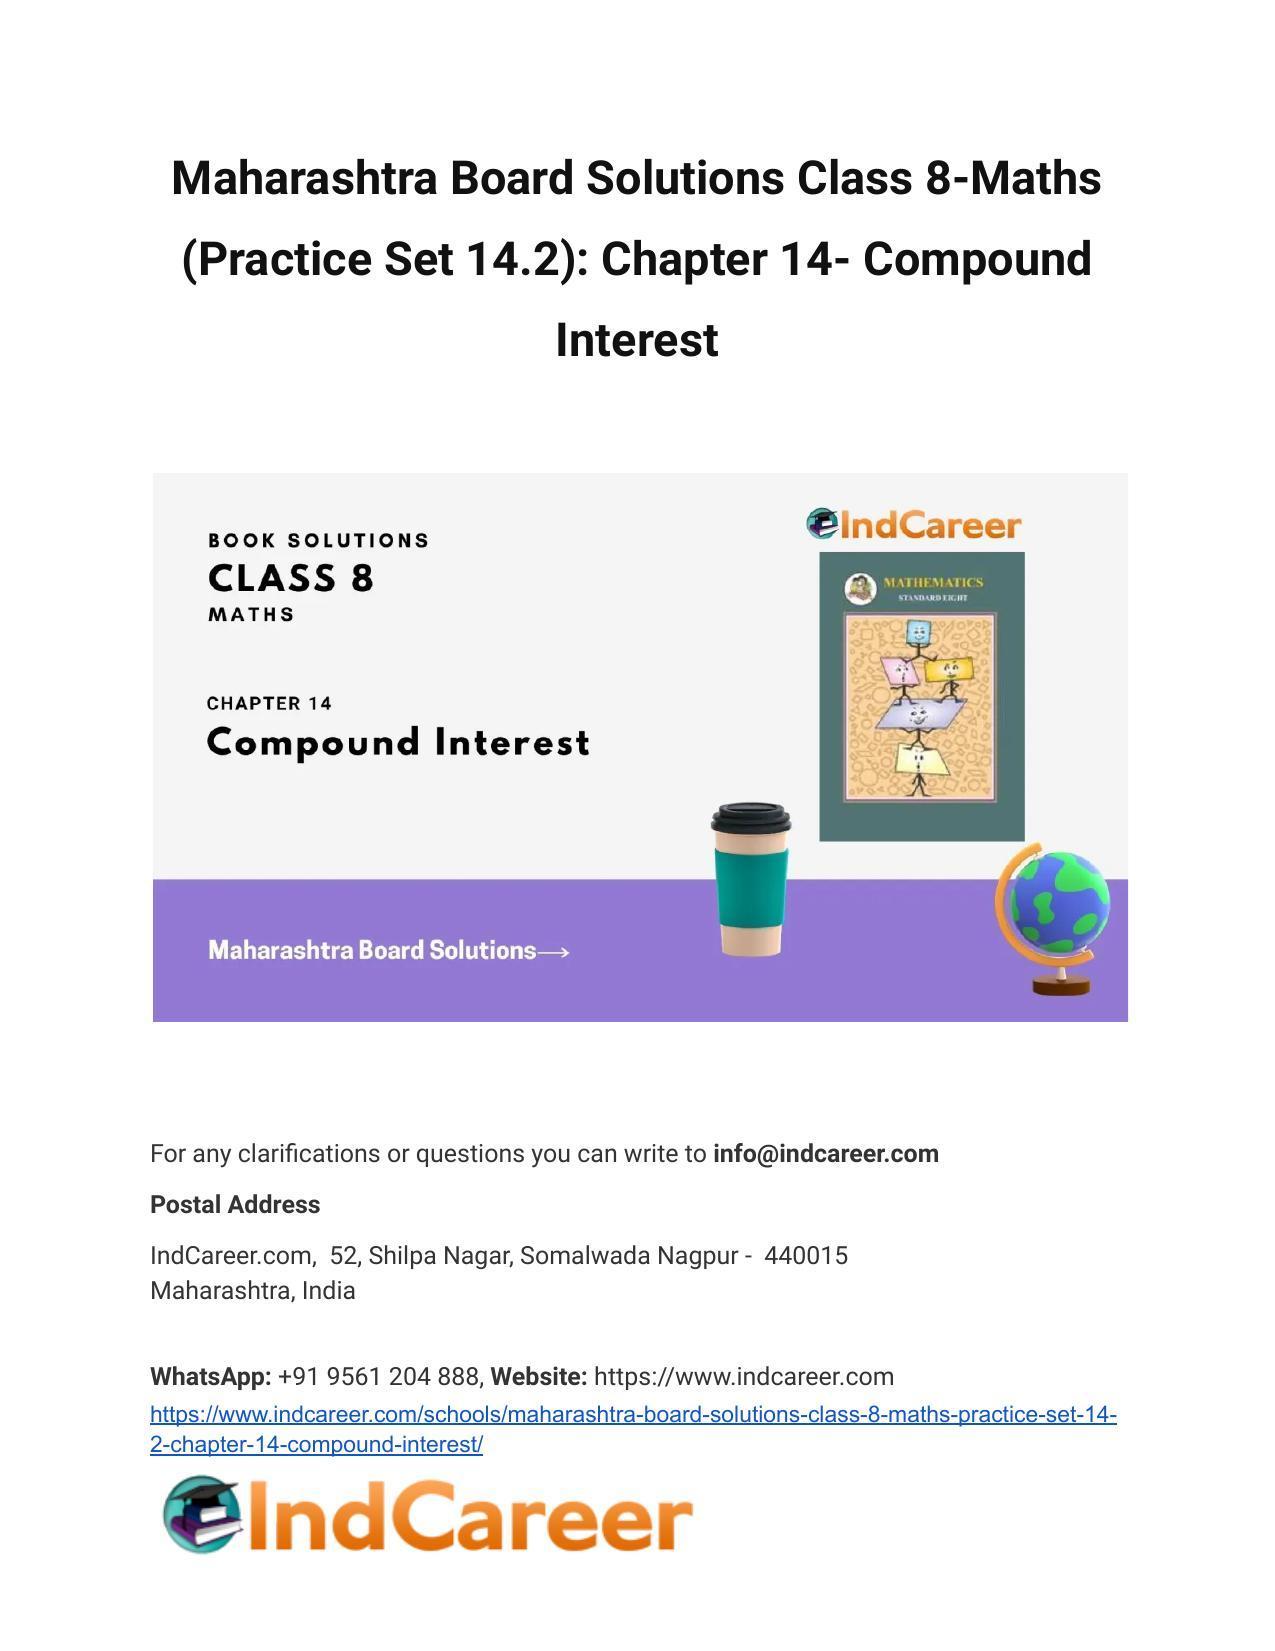 Maharashtra Board Solutions Class 8-Maths (Practice Set 14.2): Chapter 14- Compound Interest - Page 1